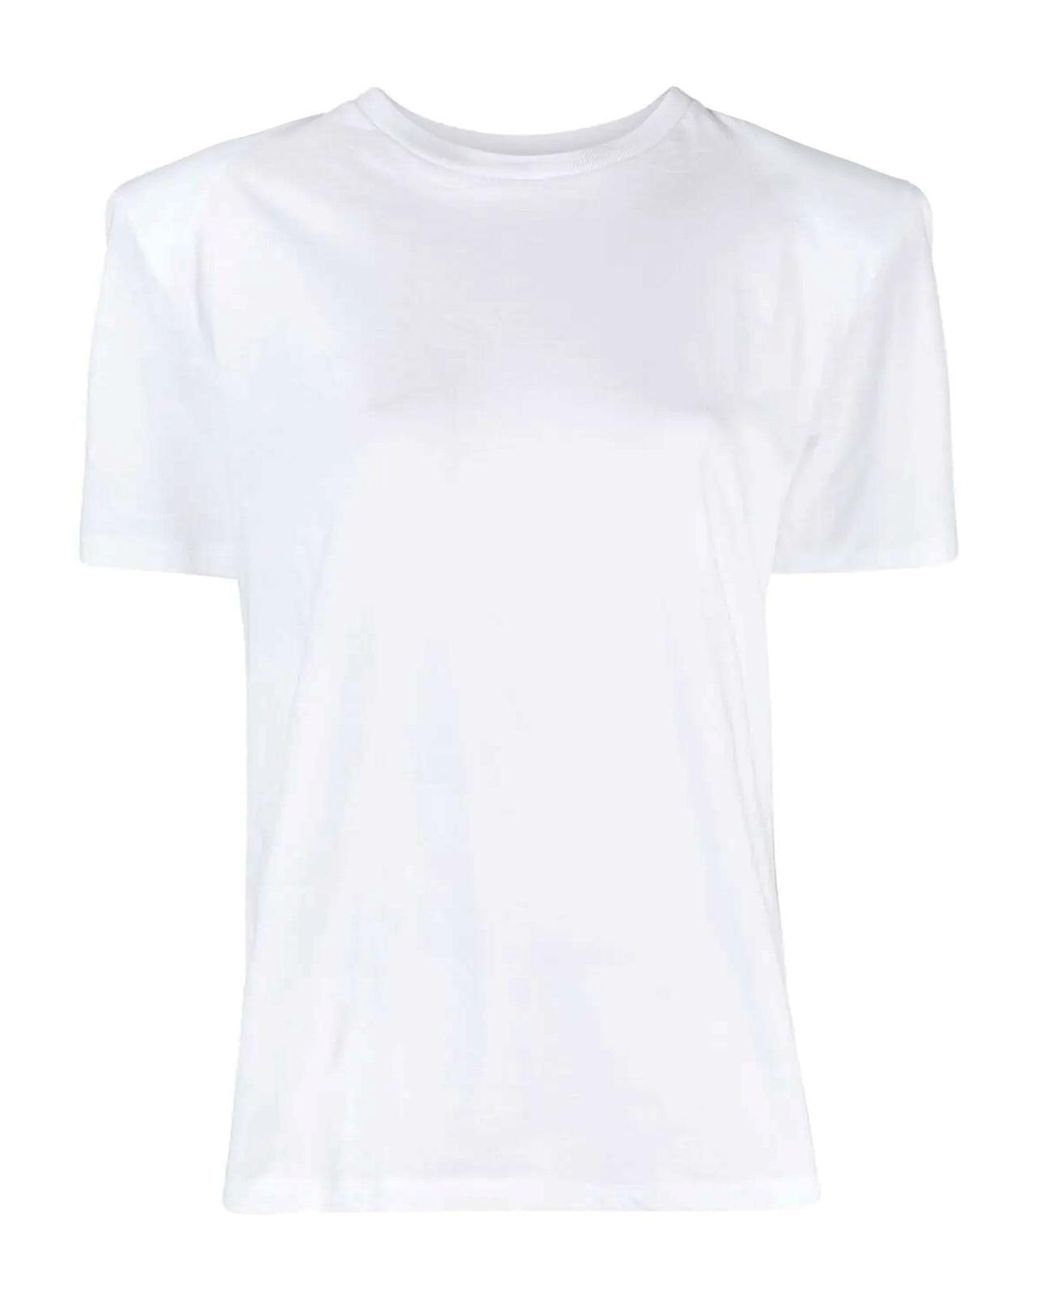 Etro Embroidered Logo Cotton T-shirt in White - Lyst